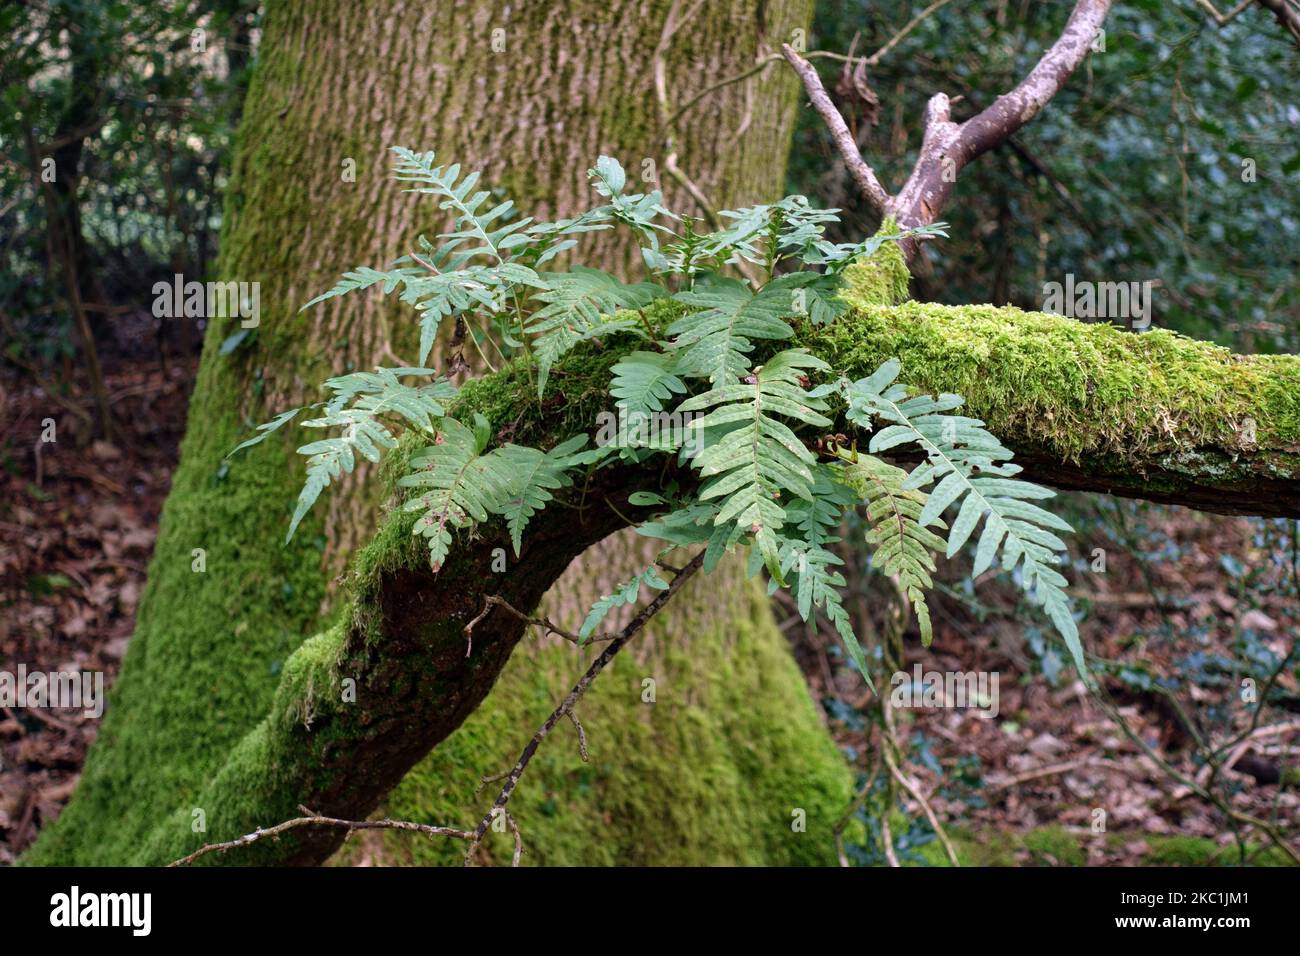 Common polypody (Polypodium vulgare) an evergreen fern growing on a mossy branch in winter, Berkshire, January Stock Photo